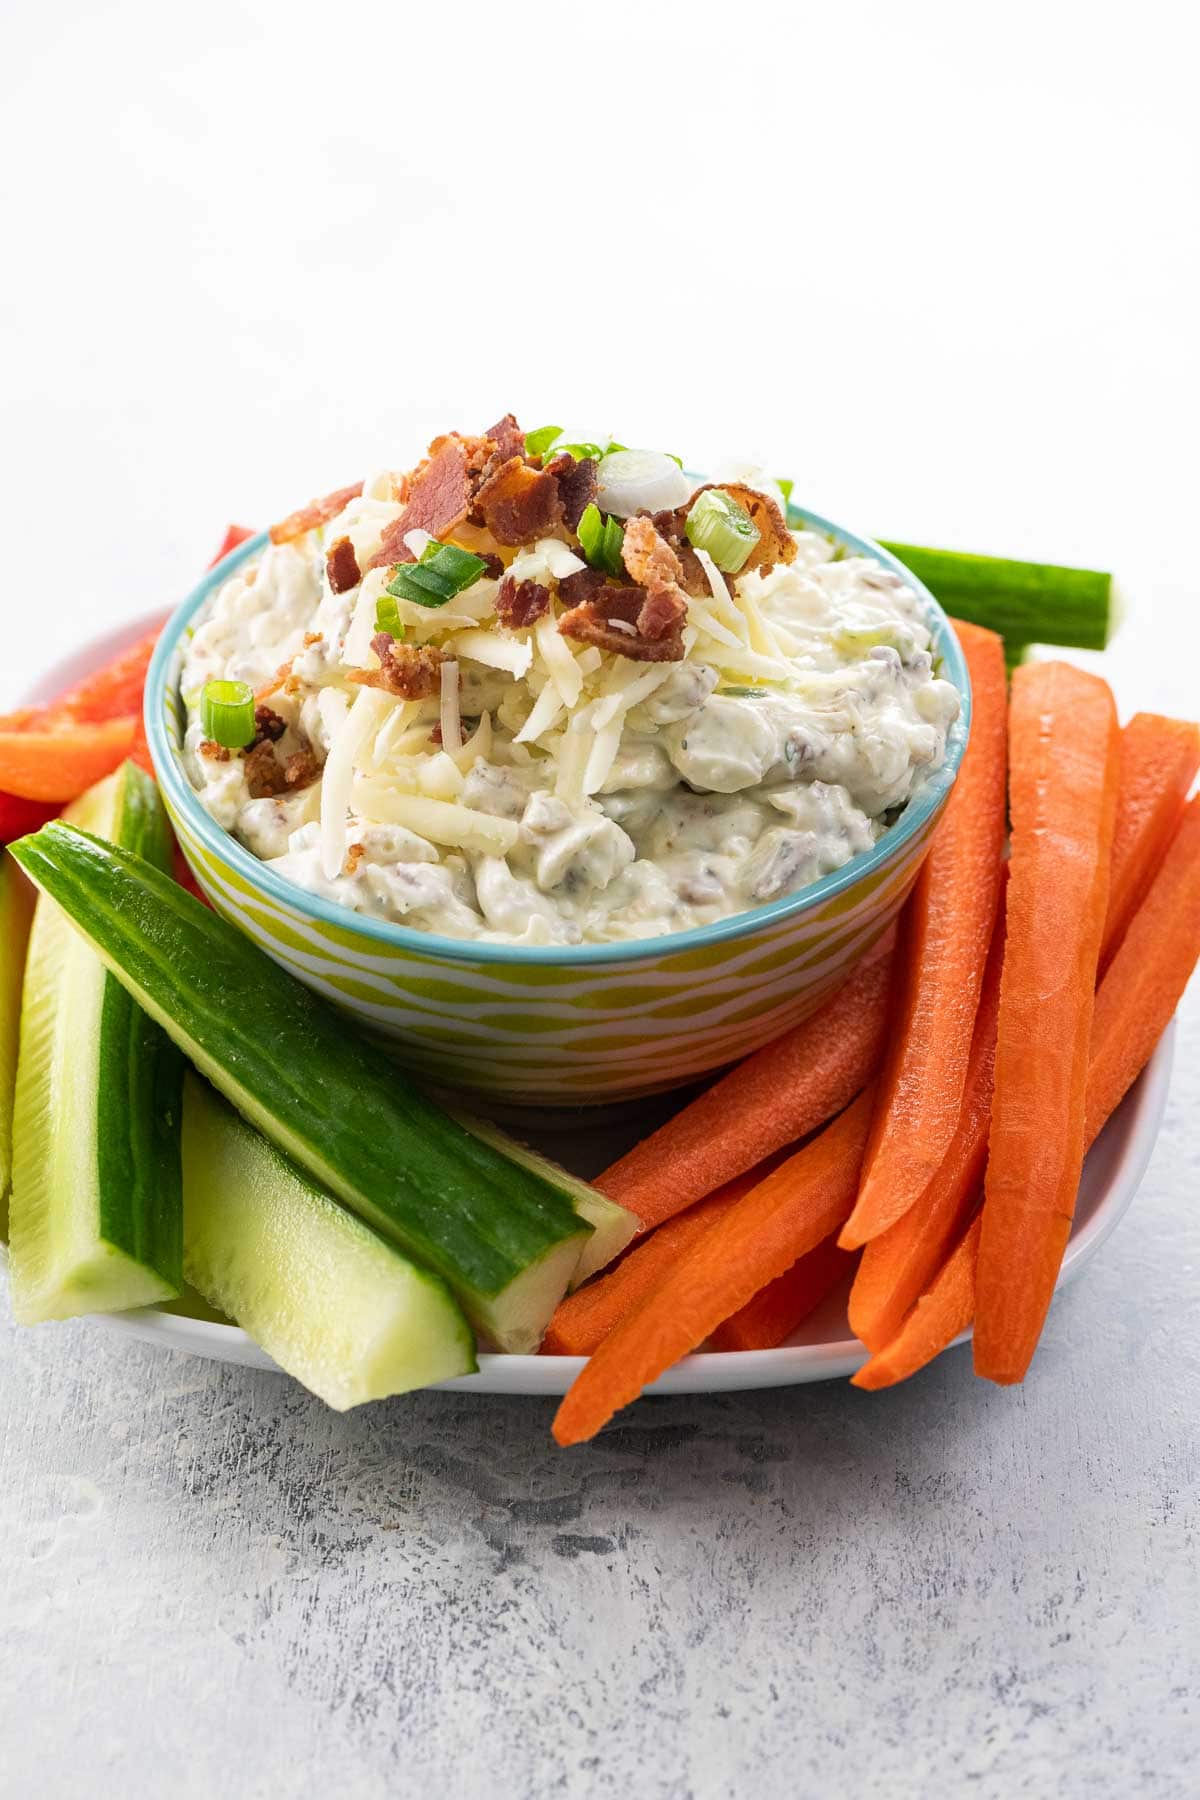 crack dip garnished with bacon, cheddar, and scallions in a serving bowl with carrots, cucumber, and red pepper sticks